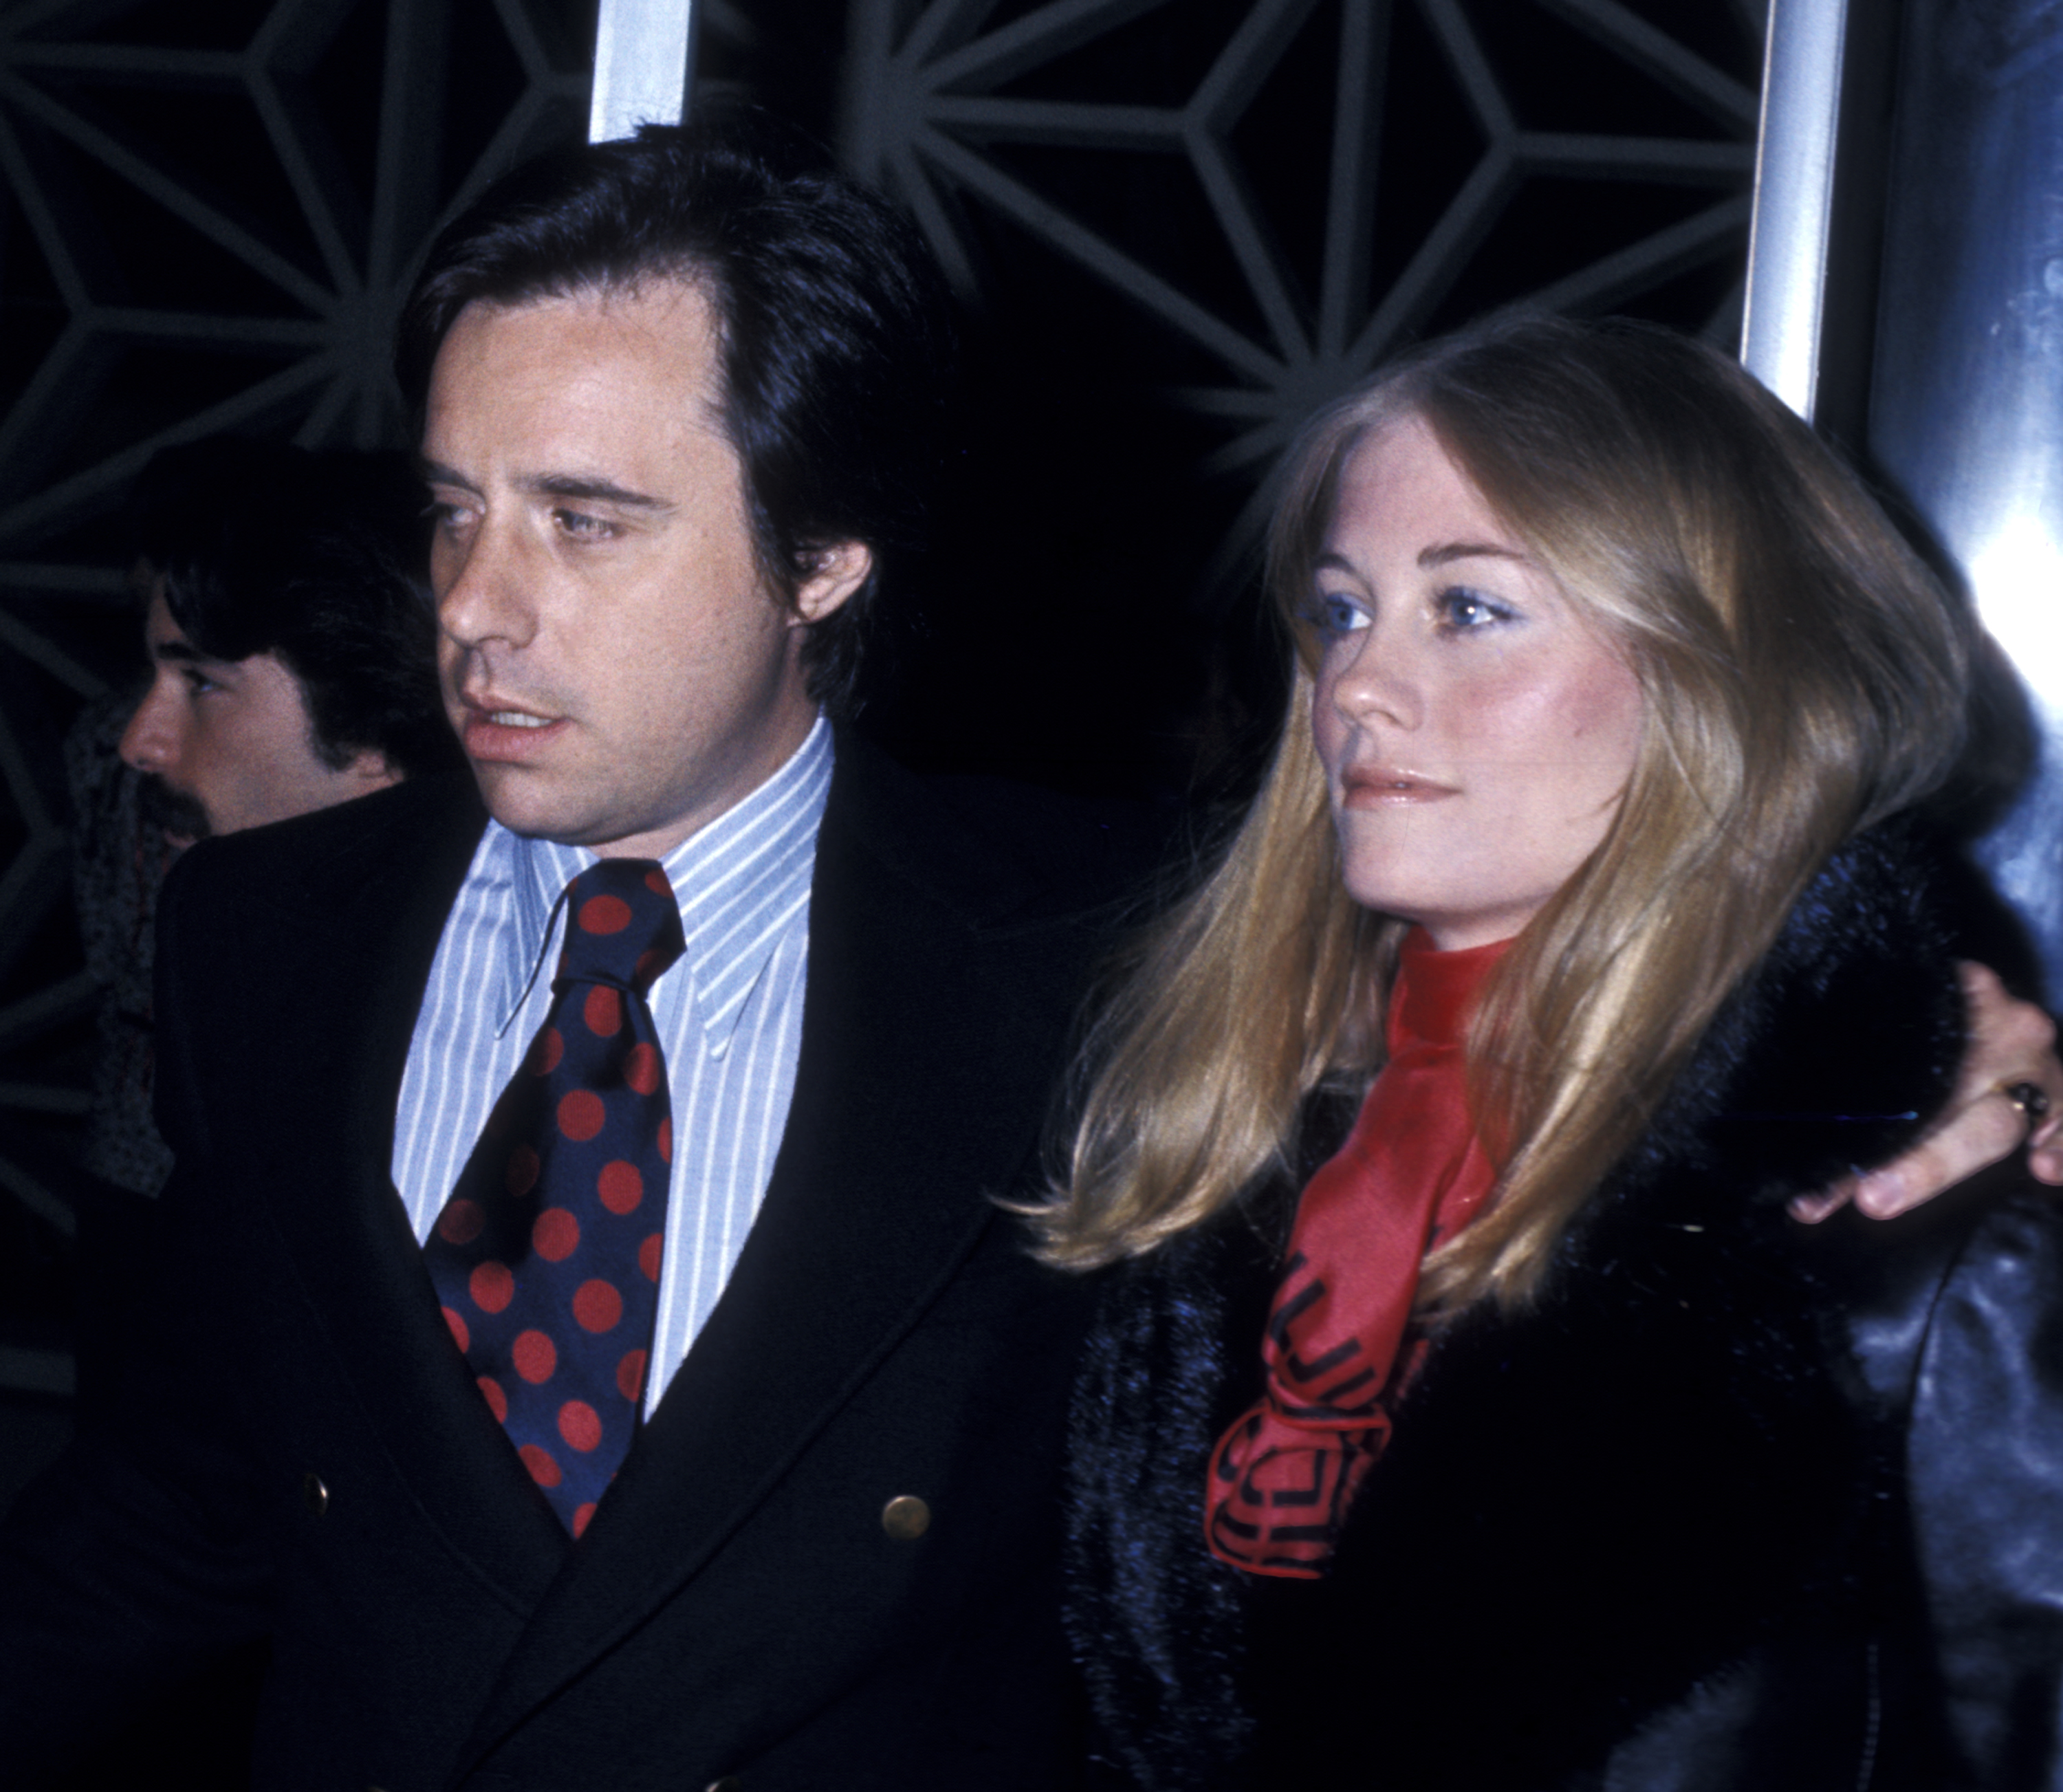 Peter Bogdanovich and Cybill Shephard attend the premiere of "Paper Moon" at the Director's Guild Theater on April 9, 1973, in Hollywood, California. | Source: Getty Images